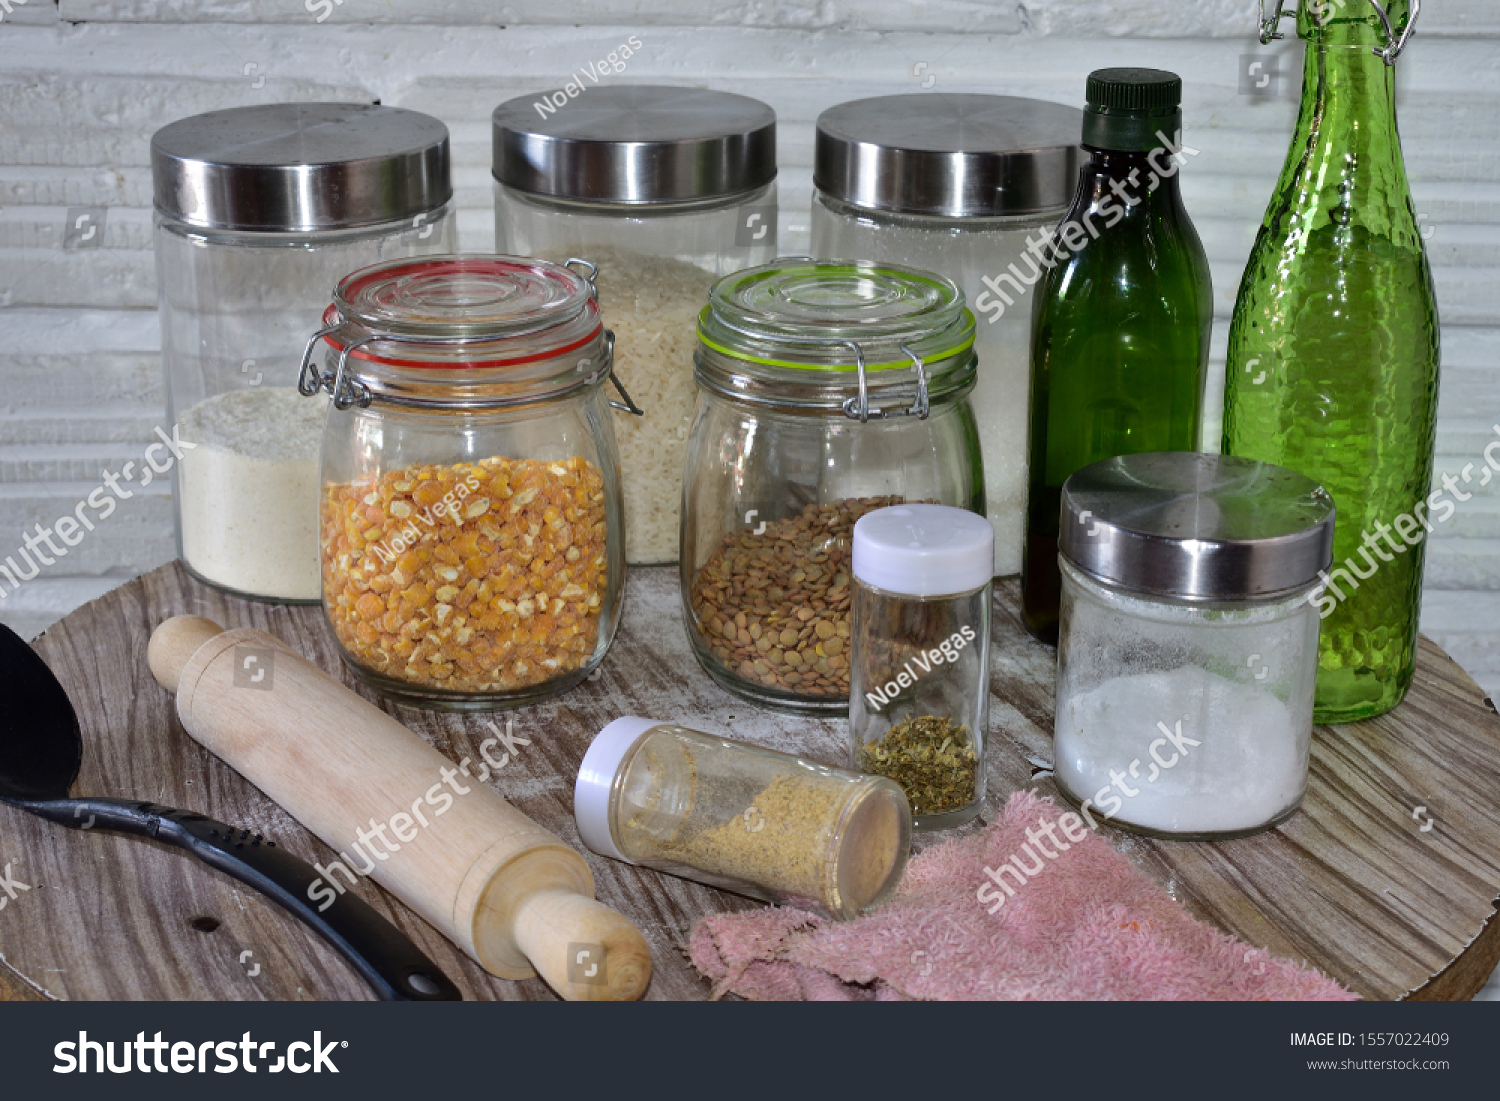 Set of glass cylindrical kitchen containers on a wooden table with cereals a spoon and a rolling pin

 #1557022409